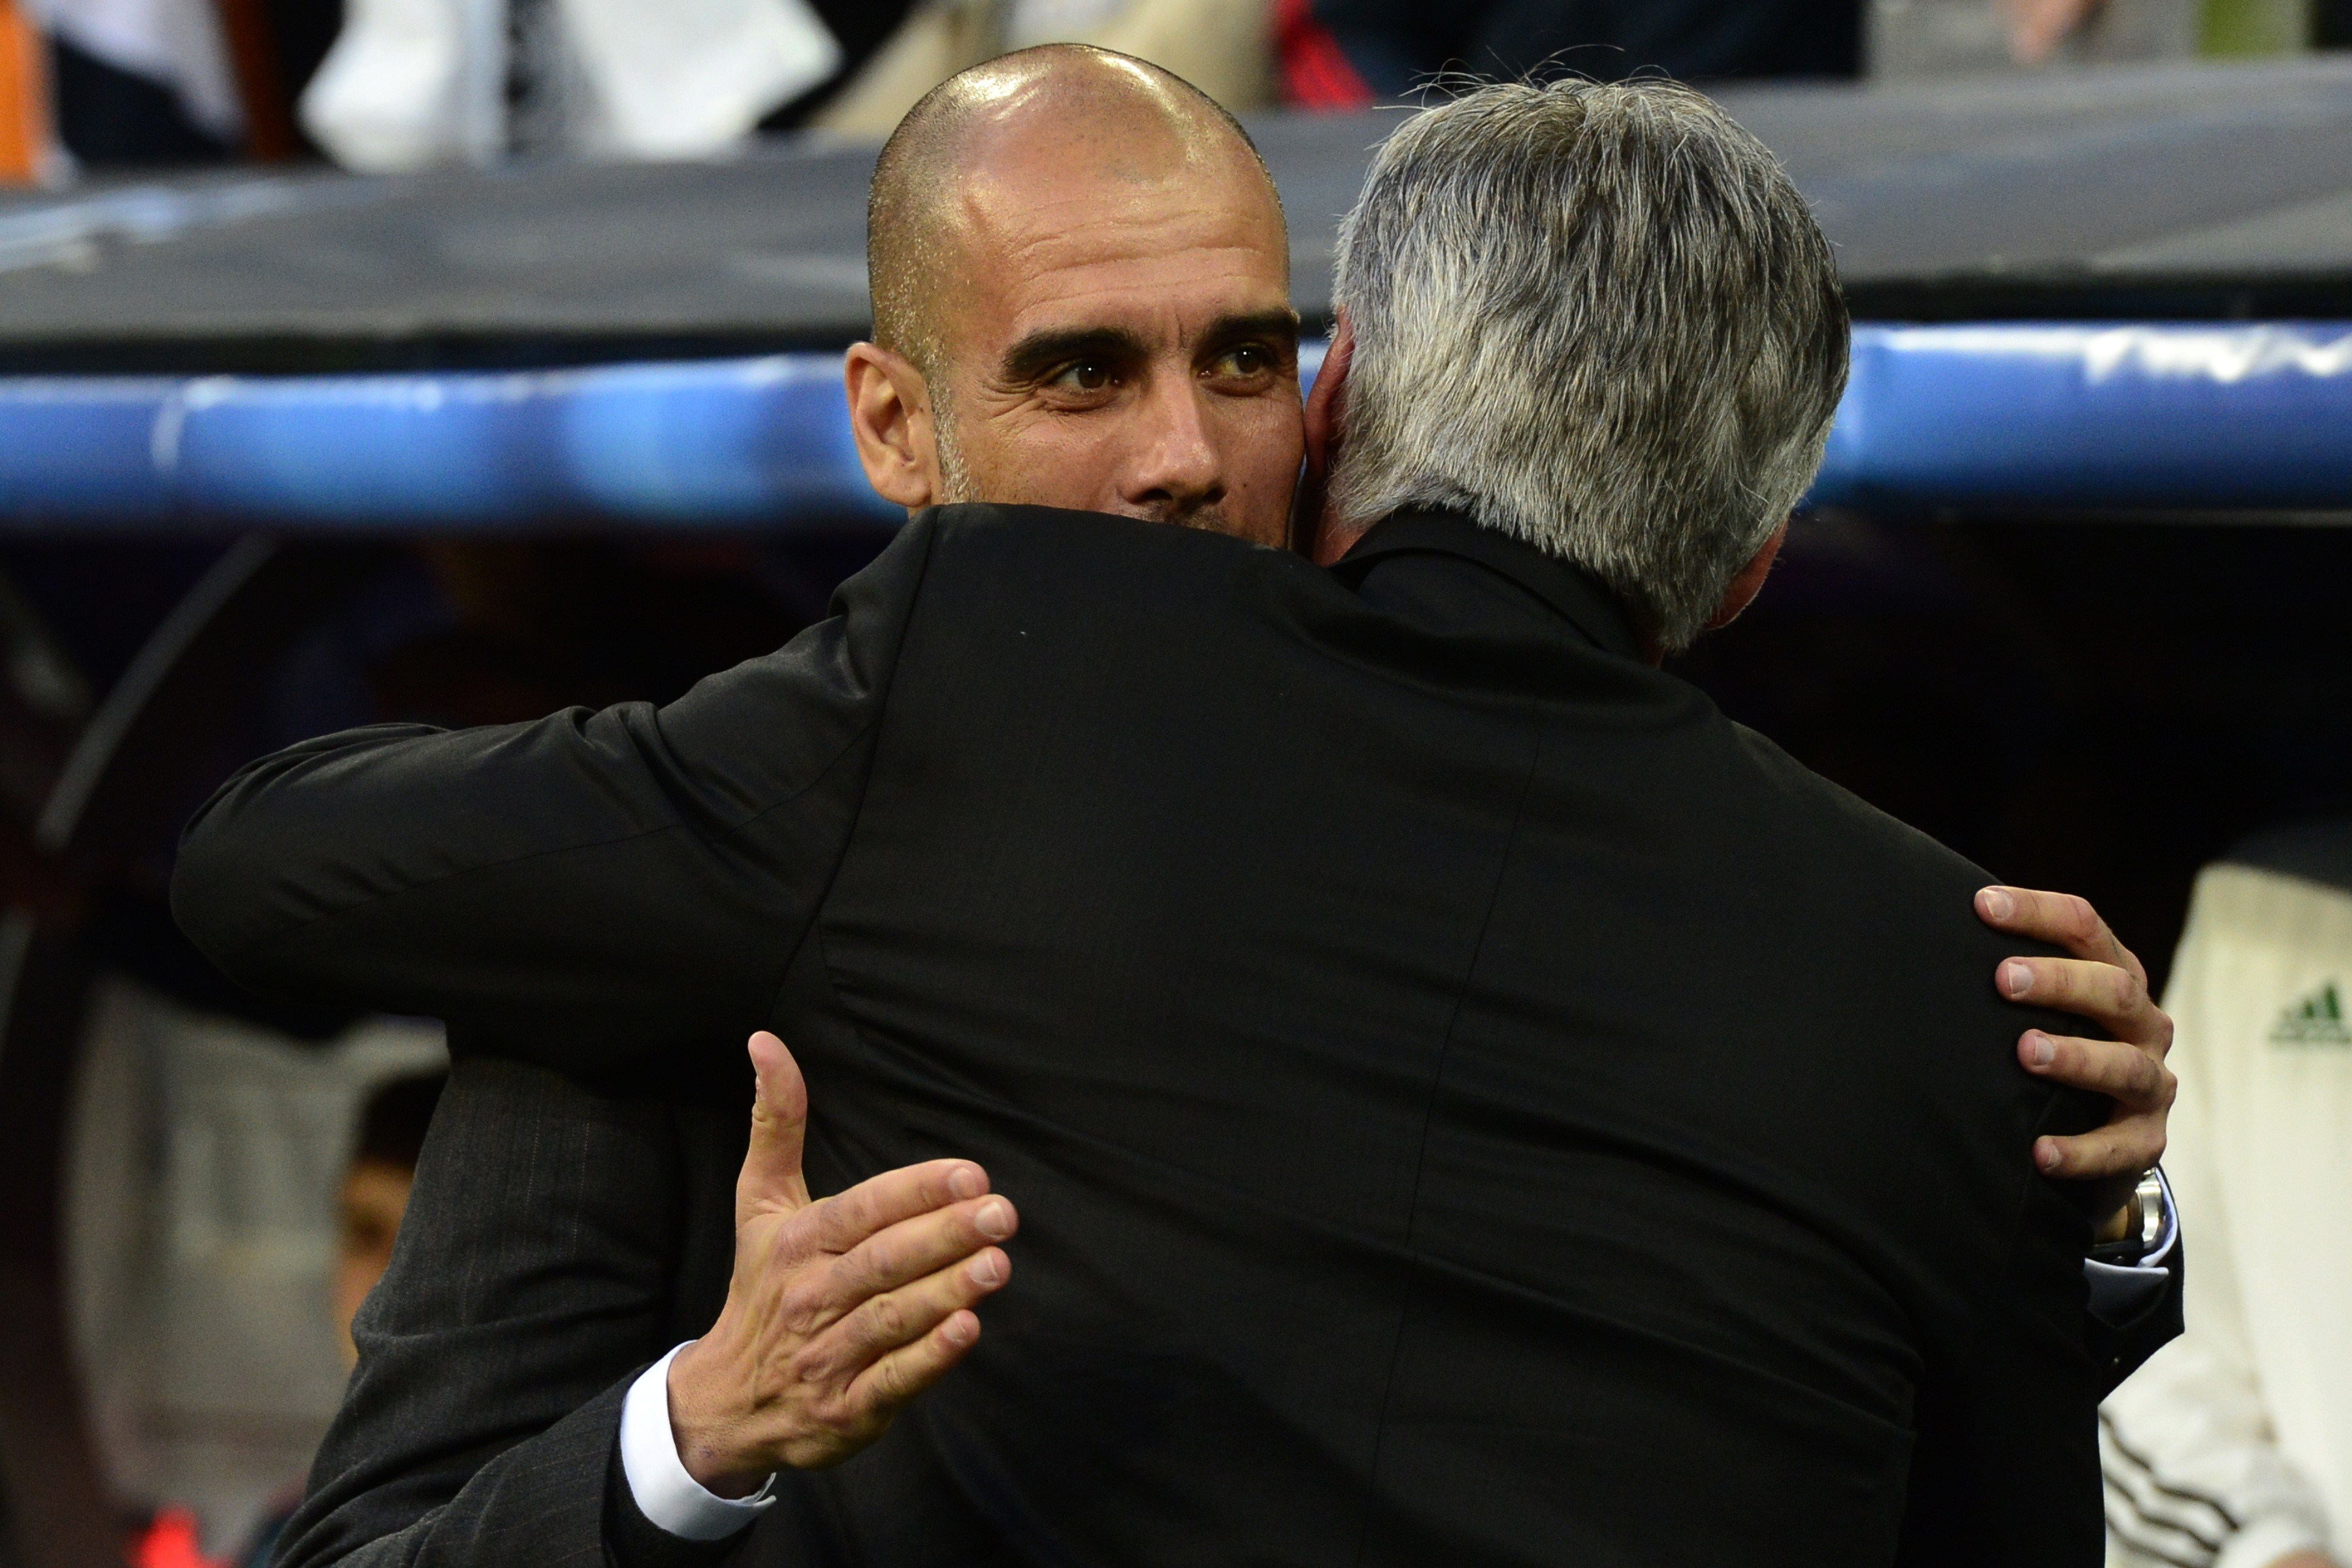 Real Madrid's Italian coach Carlo Ancelotti (R) embraces Bayern Munich's Spanish head coach Pep Guardiola during the UEFA Champions League semifinal first leg football match Real Madrid CF vs FC Bayern Munchen at the Santiago Bernabeu stadium in Madrid on April 23, 2014.   AFP PHOTO/ JAVIER SORIANO        (Photo credit should read JAVIER SORIANO/AFP via Getty Images)